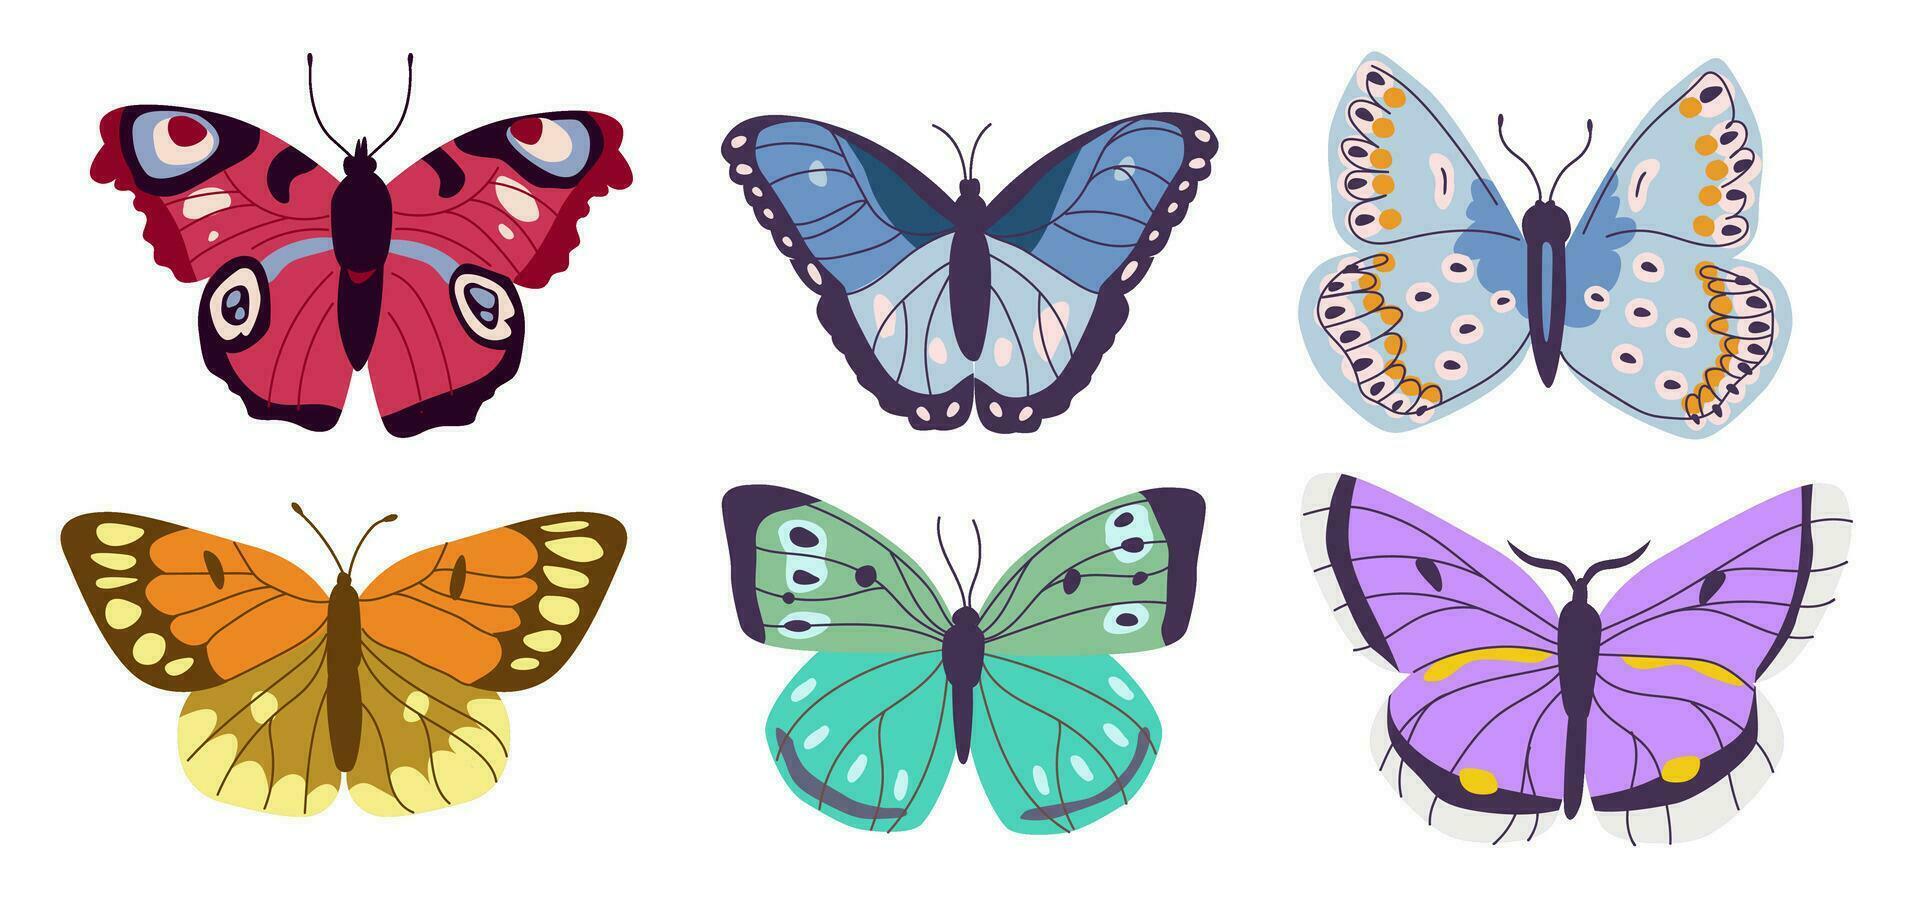 Colorful hand-drawn butterflies set. Decorative flying insects with colorful wings. Vector illustration.